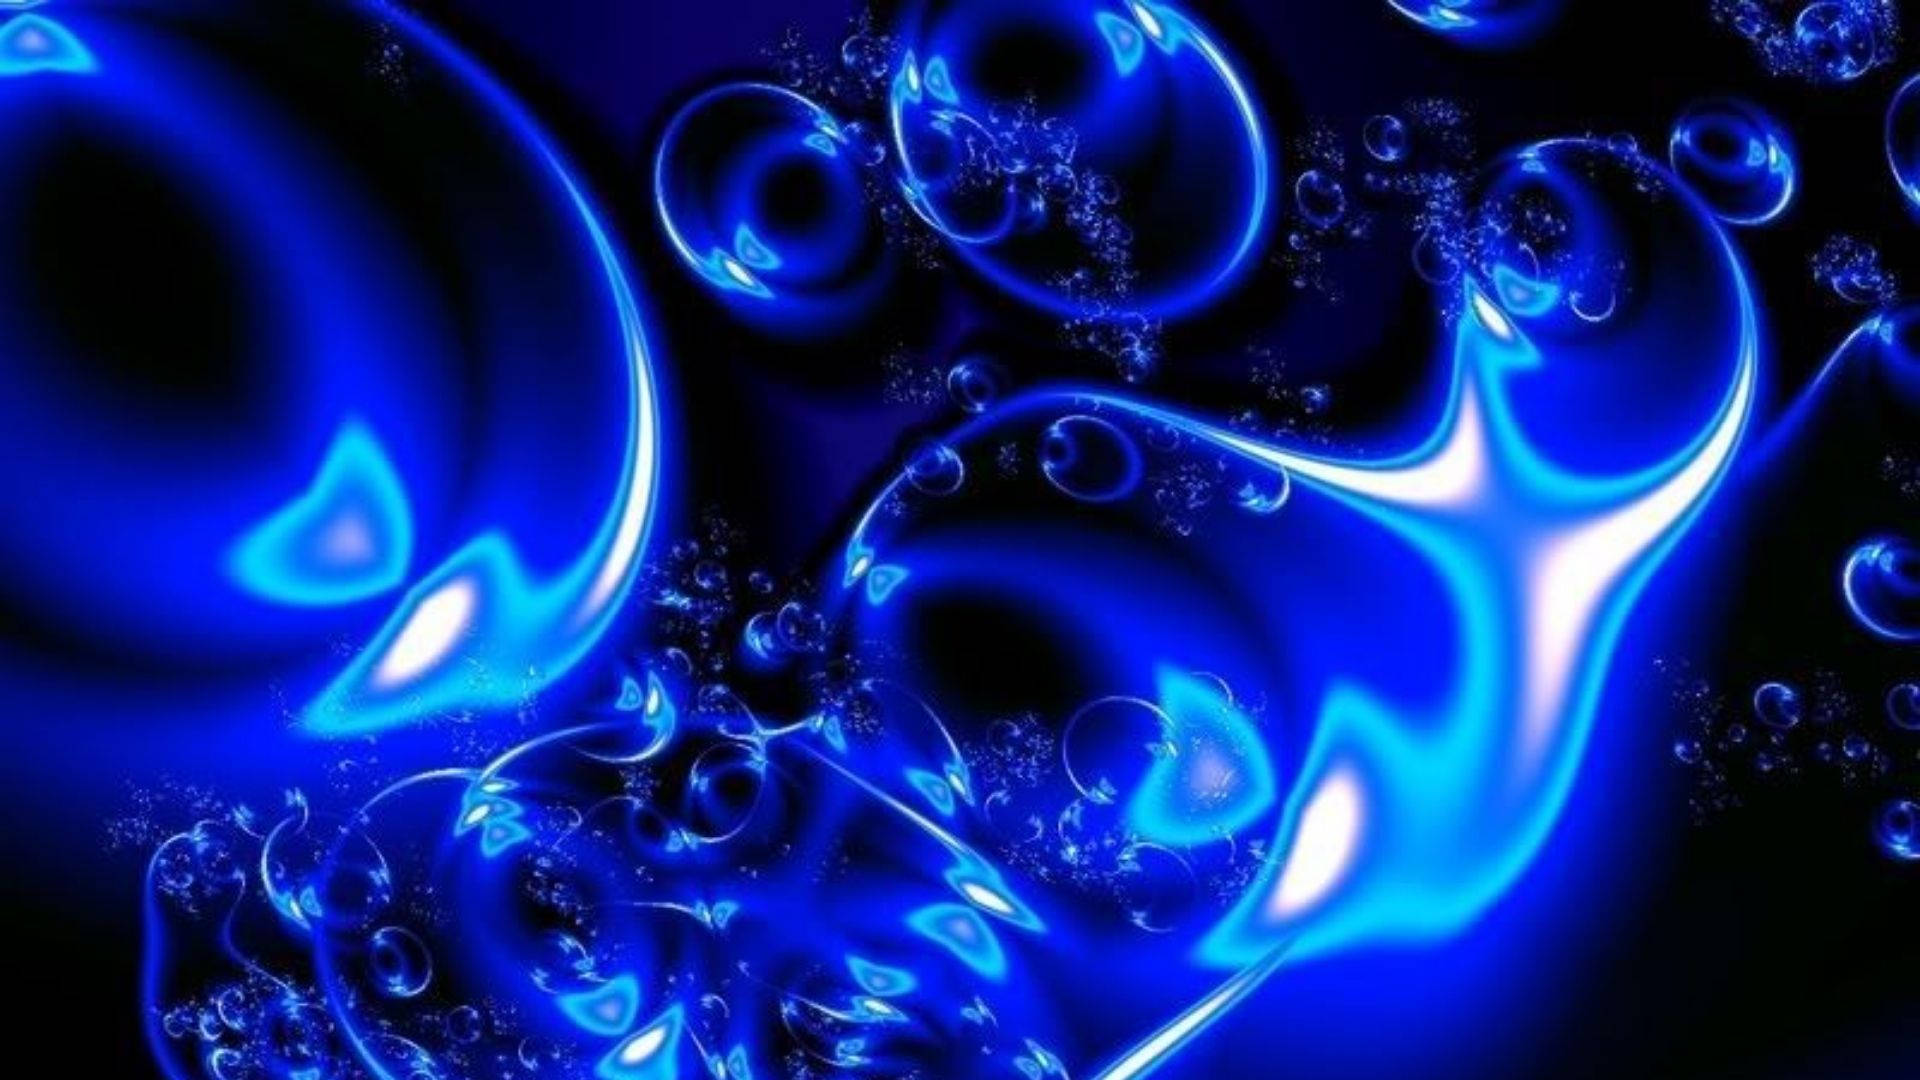 450 Neon Blue Pictures HD  Download Free Images on Unsplash